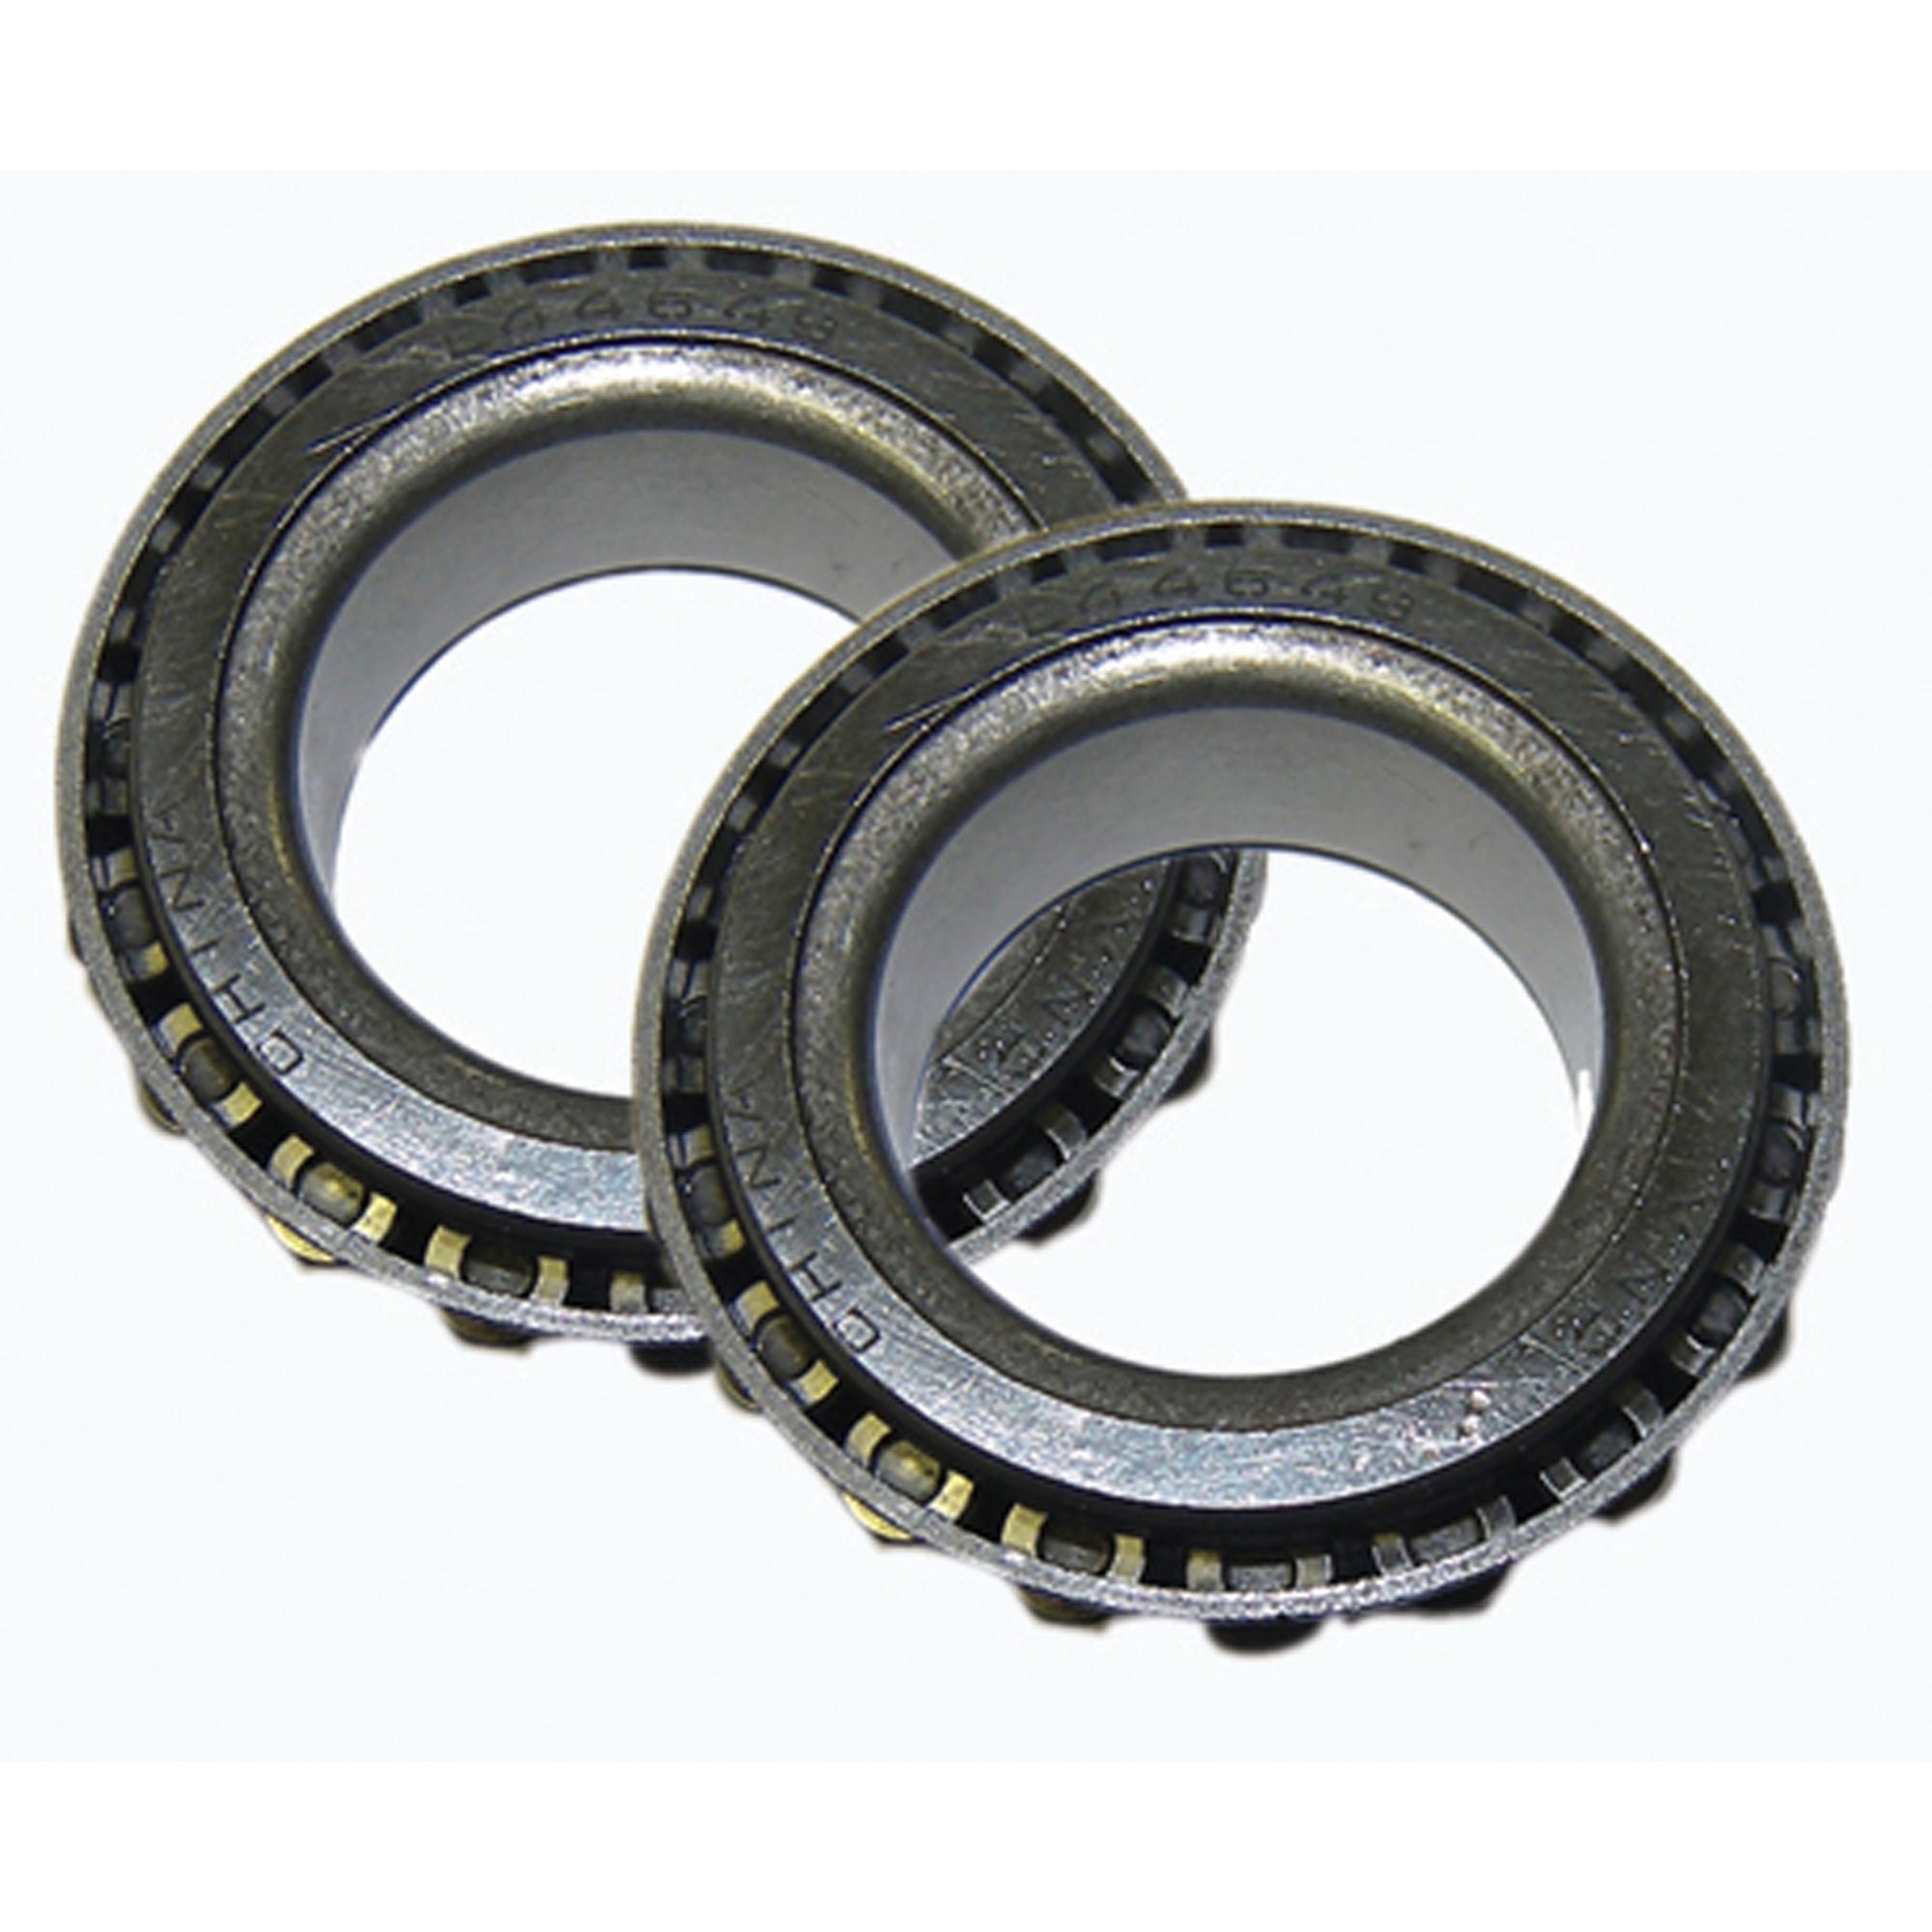 AP Products 014-181628-2 Inner/Outer Bearing - L-44643, 2 Pack